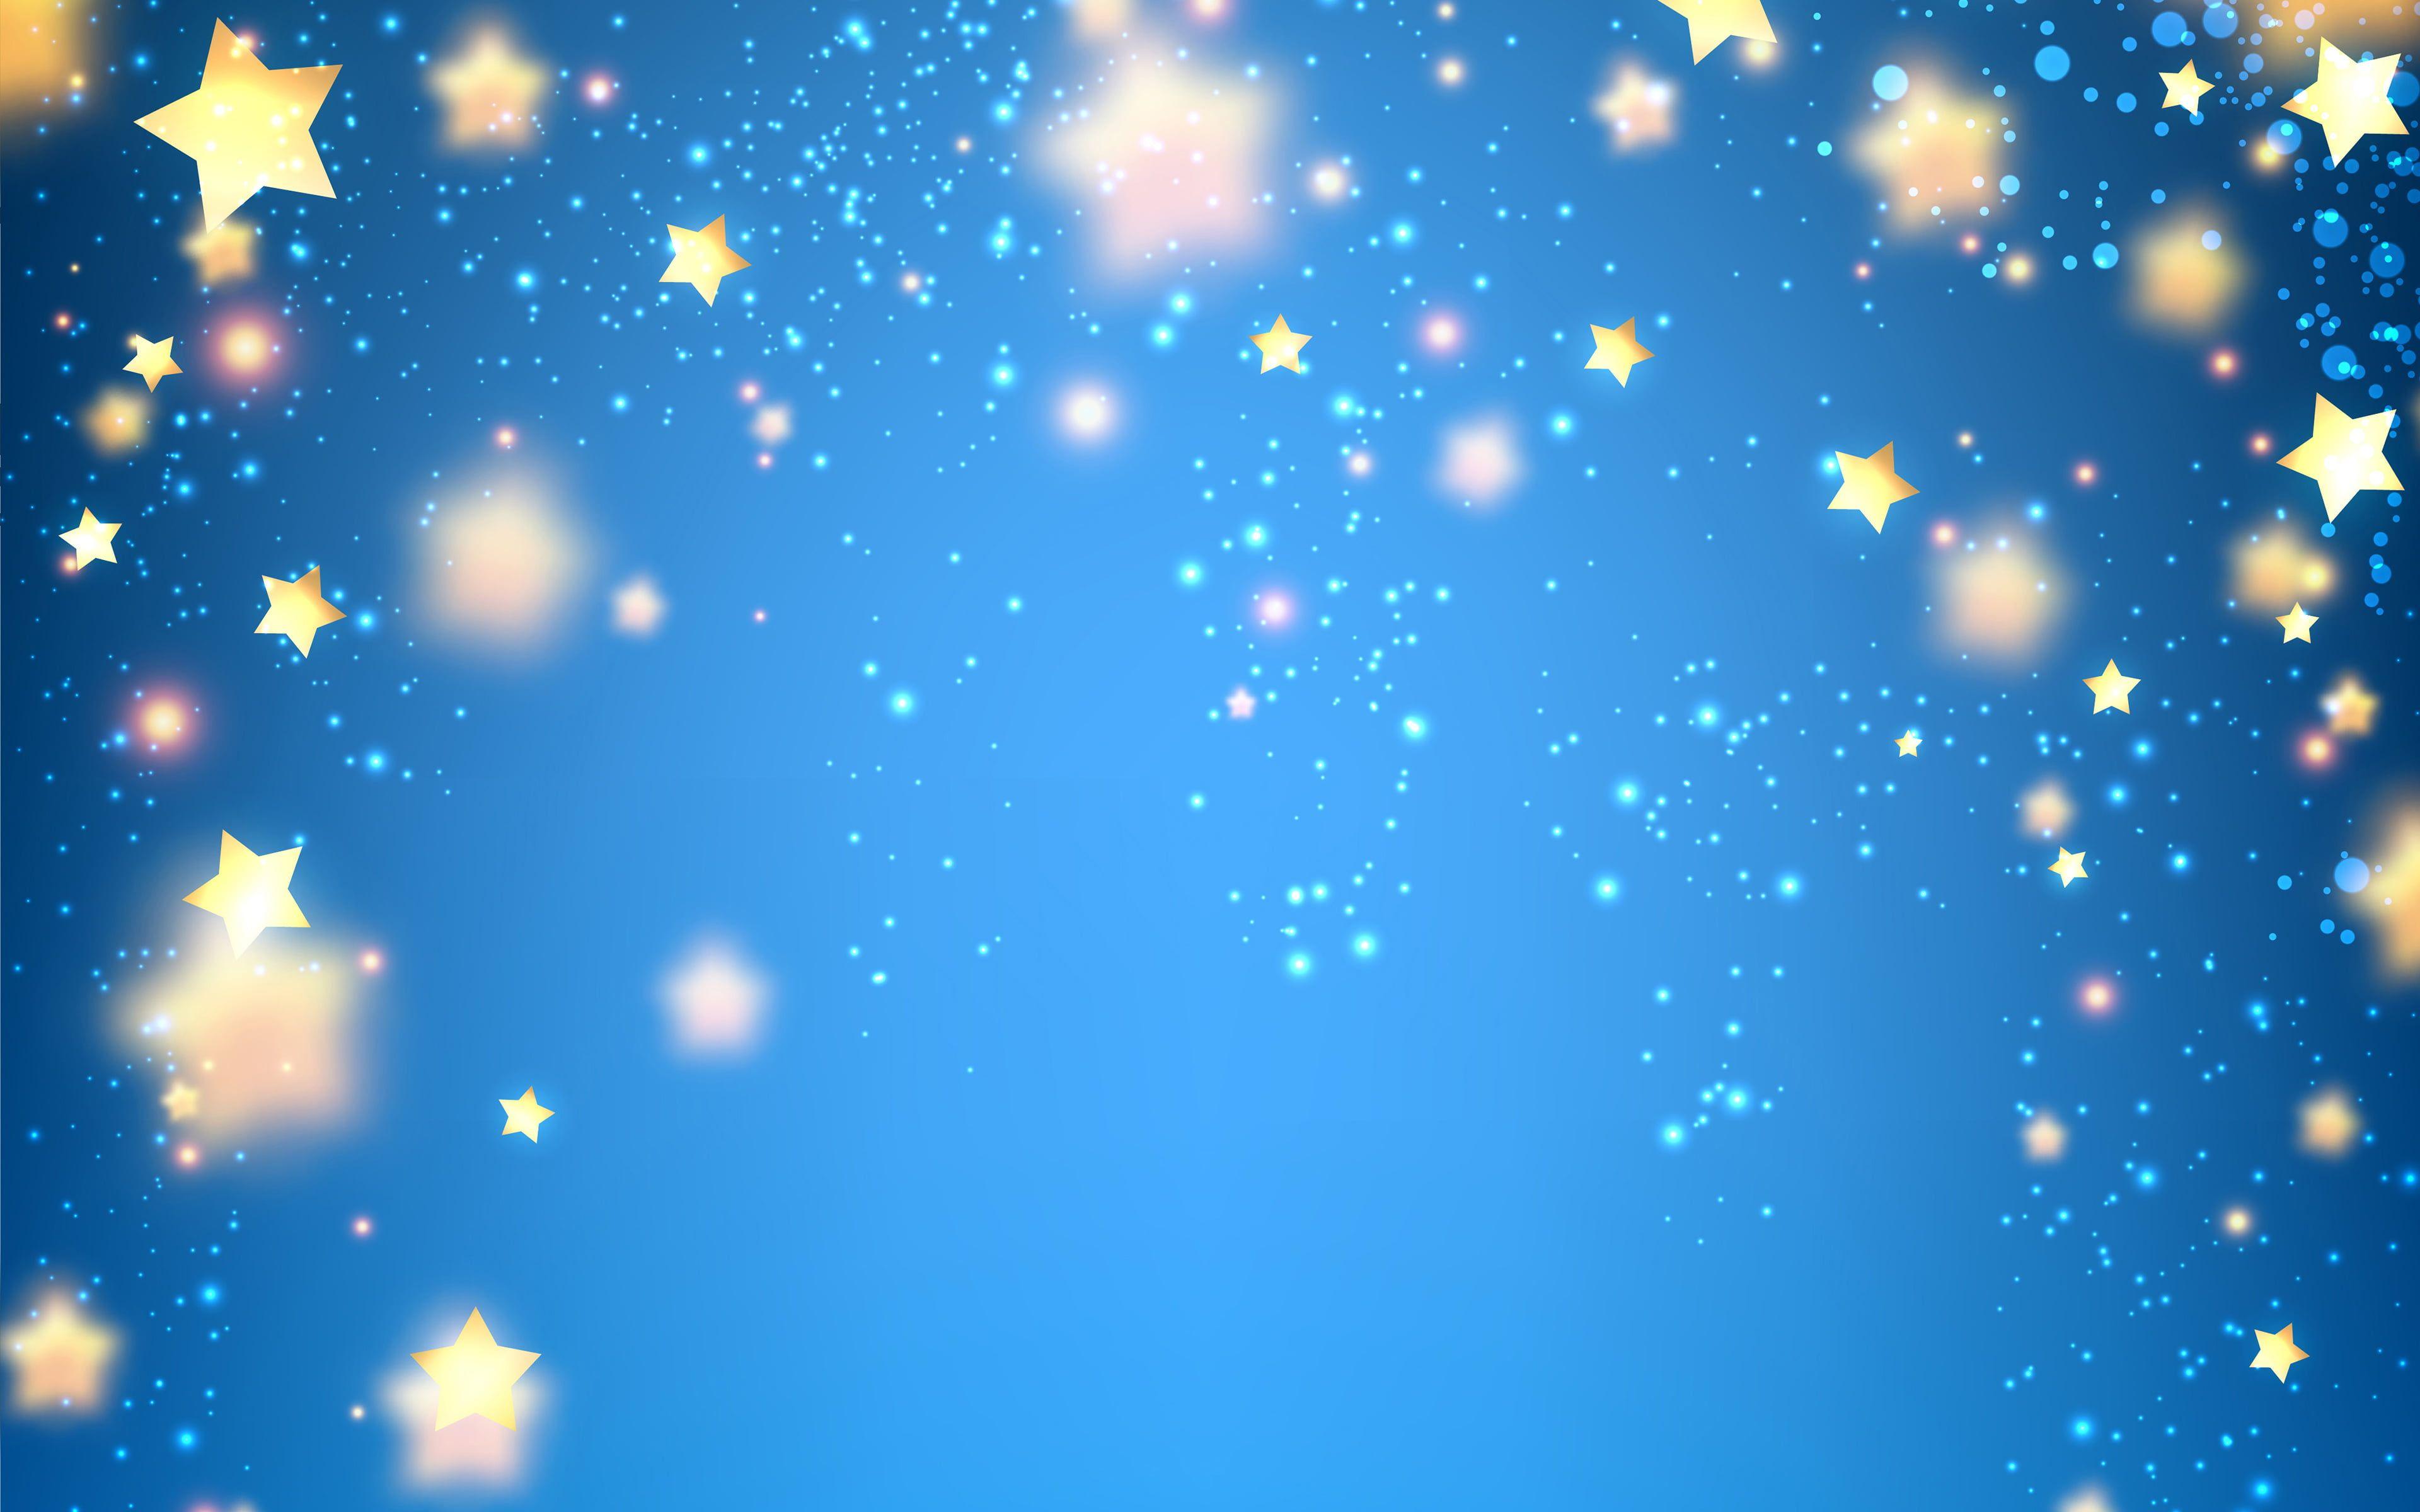 Yellow star with blue background wallpaper HD wallpaper. Wallpaper